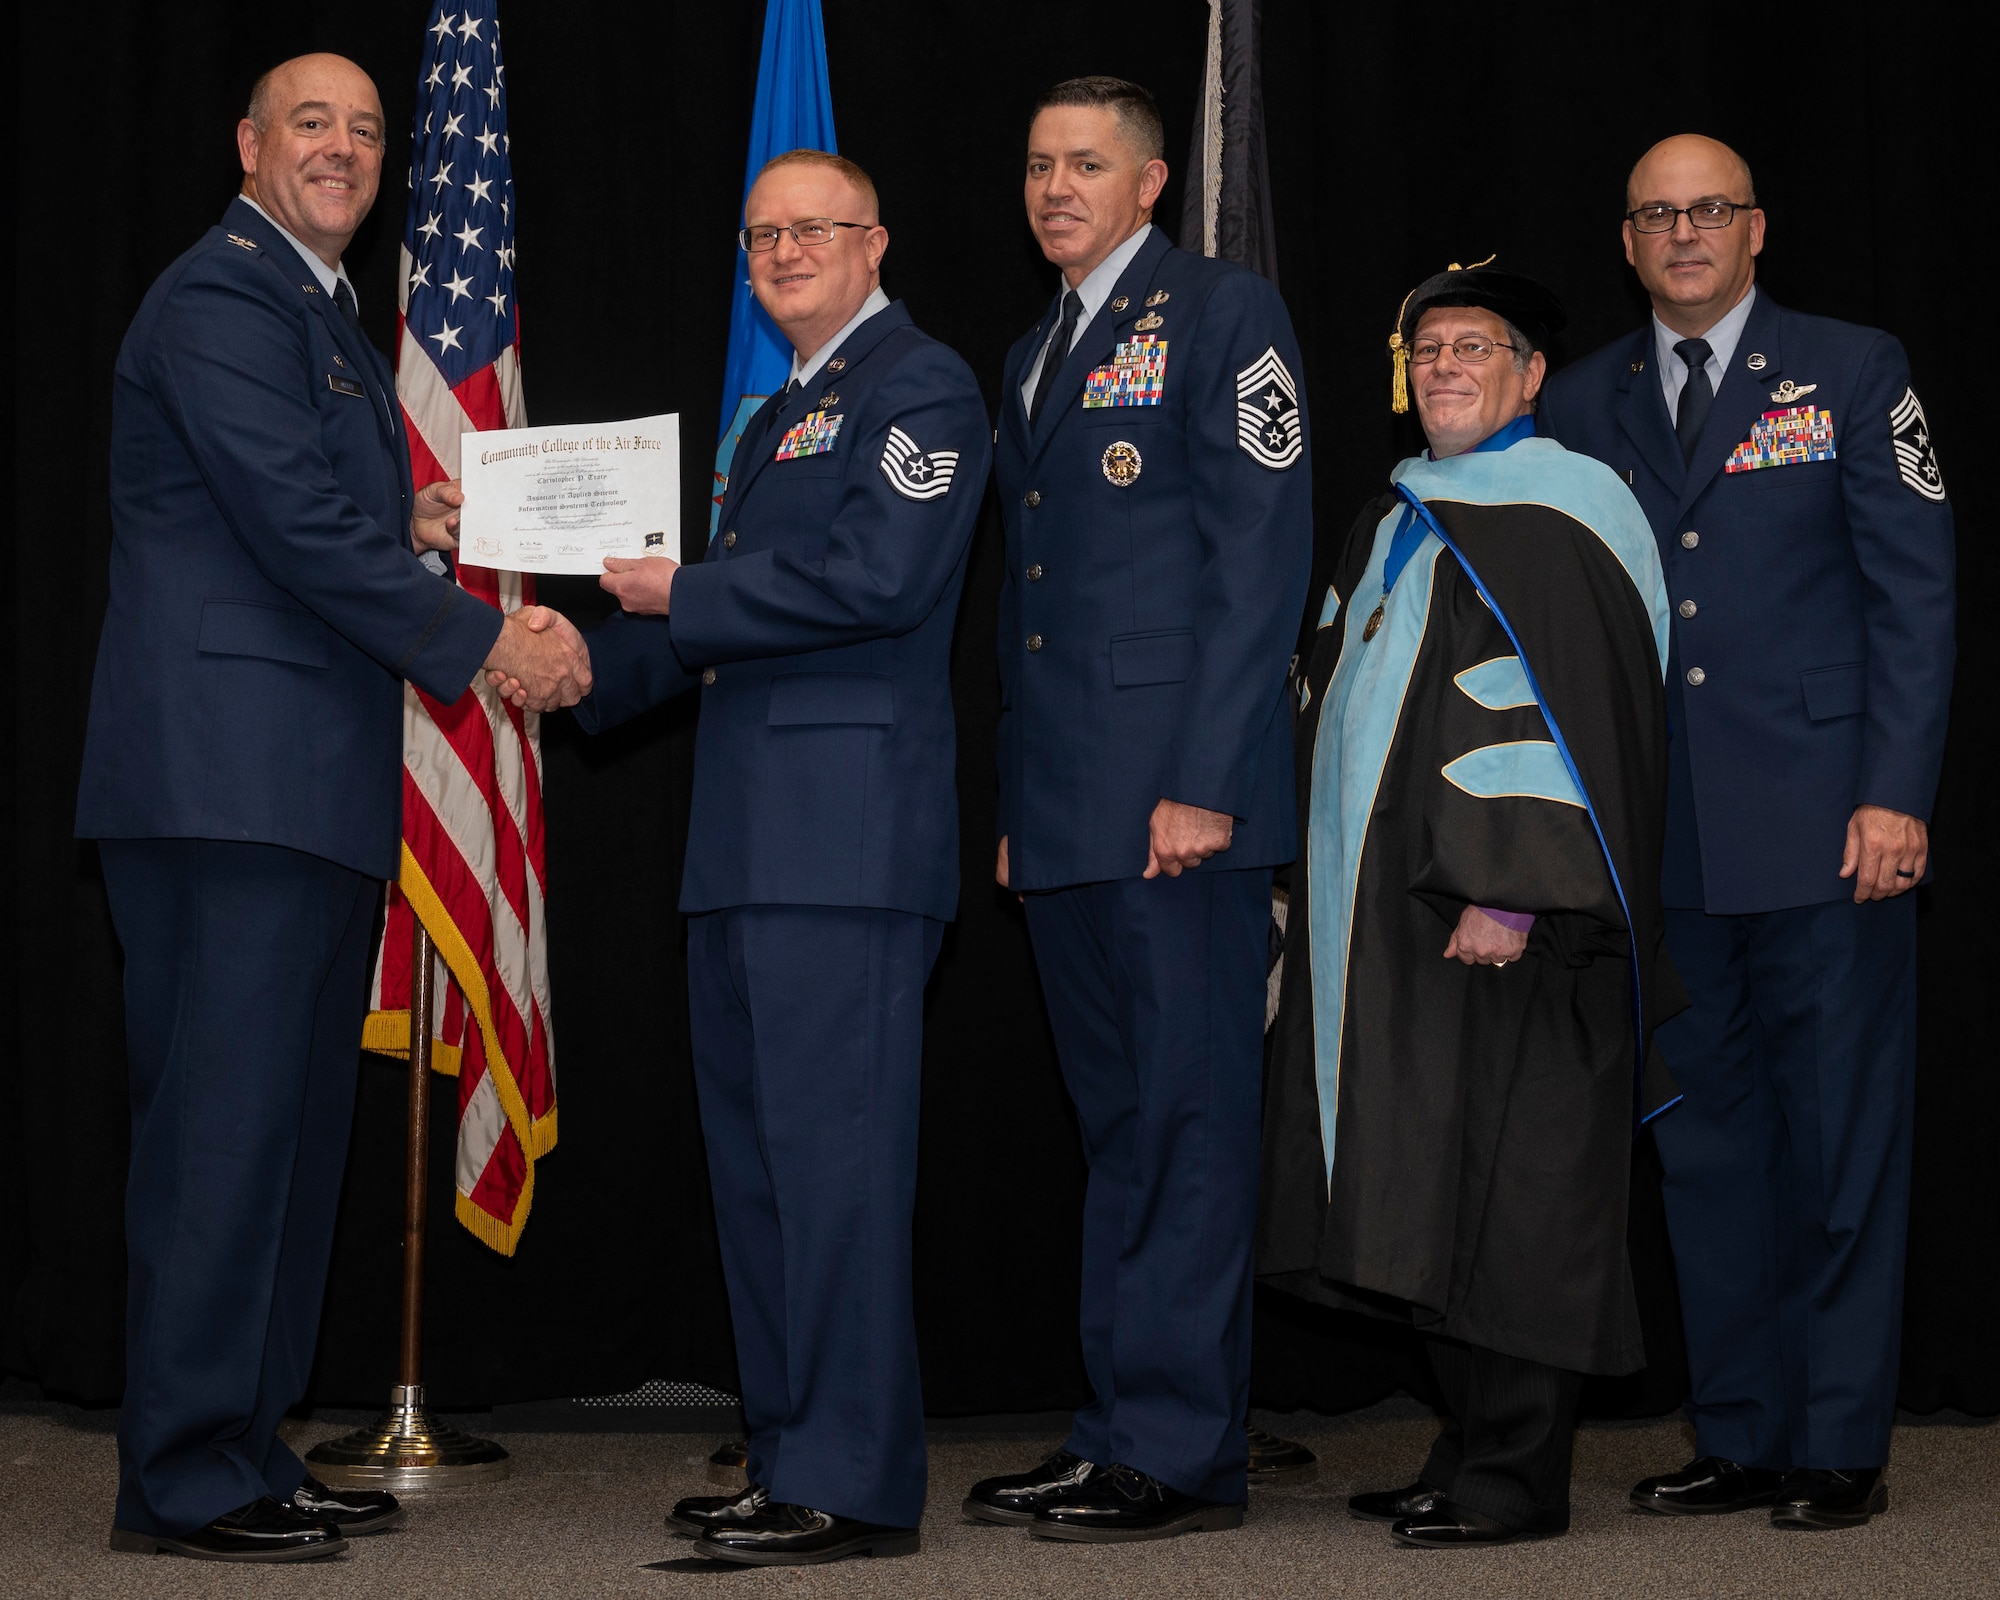 Col. Patrick Miller, 88th Air Base Wing and installation commander, presents Tech. Sgt. Christopher Tracy with his associate in applied science degree in information systems technology during the Community College of the Air Force graduation ceremony June 15, 2022, at the National Museum of the Air Force, Wright-Patterson Air Force Base, Ohio. With Miller were Jason Schaffer, 88 ABW command chief; Donald Ellwood, CCAF Education Services director; and Chief Master Sgt. James Fitch, Air Force Research Laboratory command chief; who gave the commencement address. (U.S. Air Force photo by R. J. Oriez)